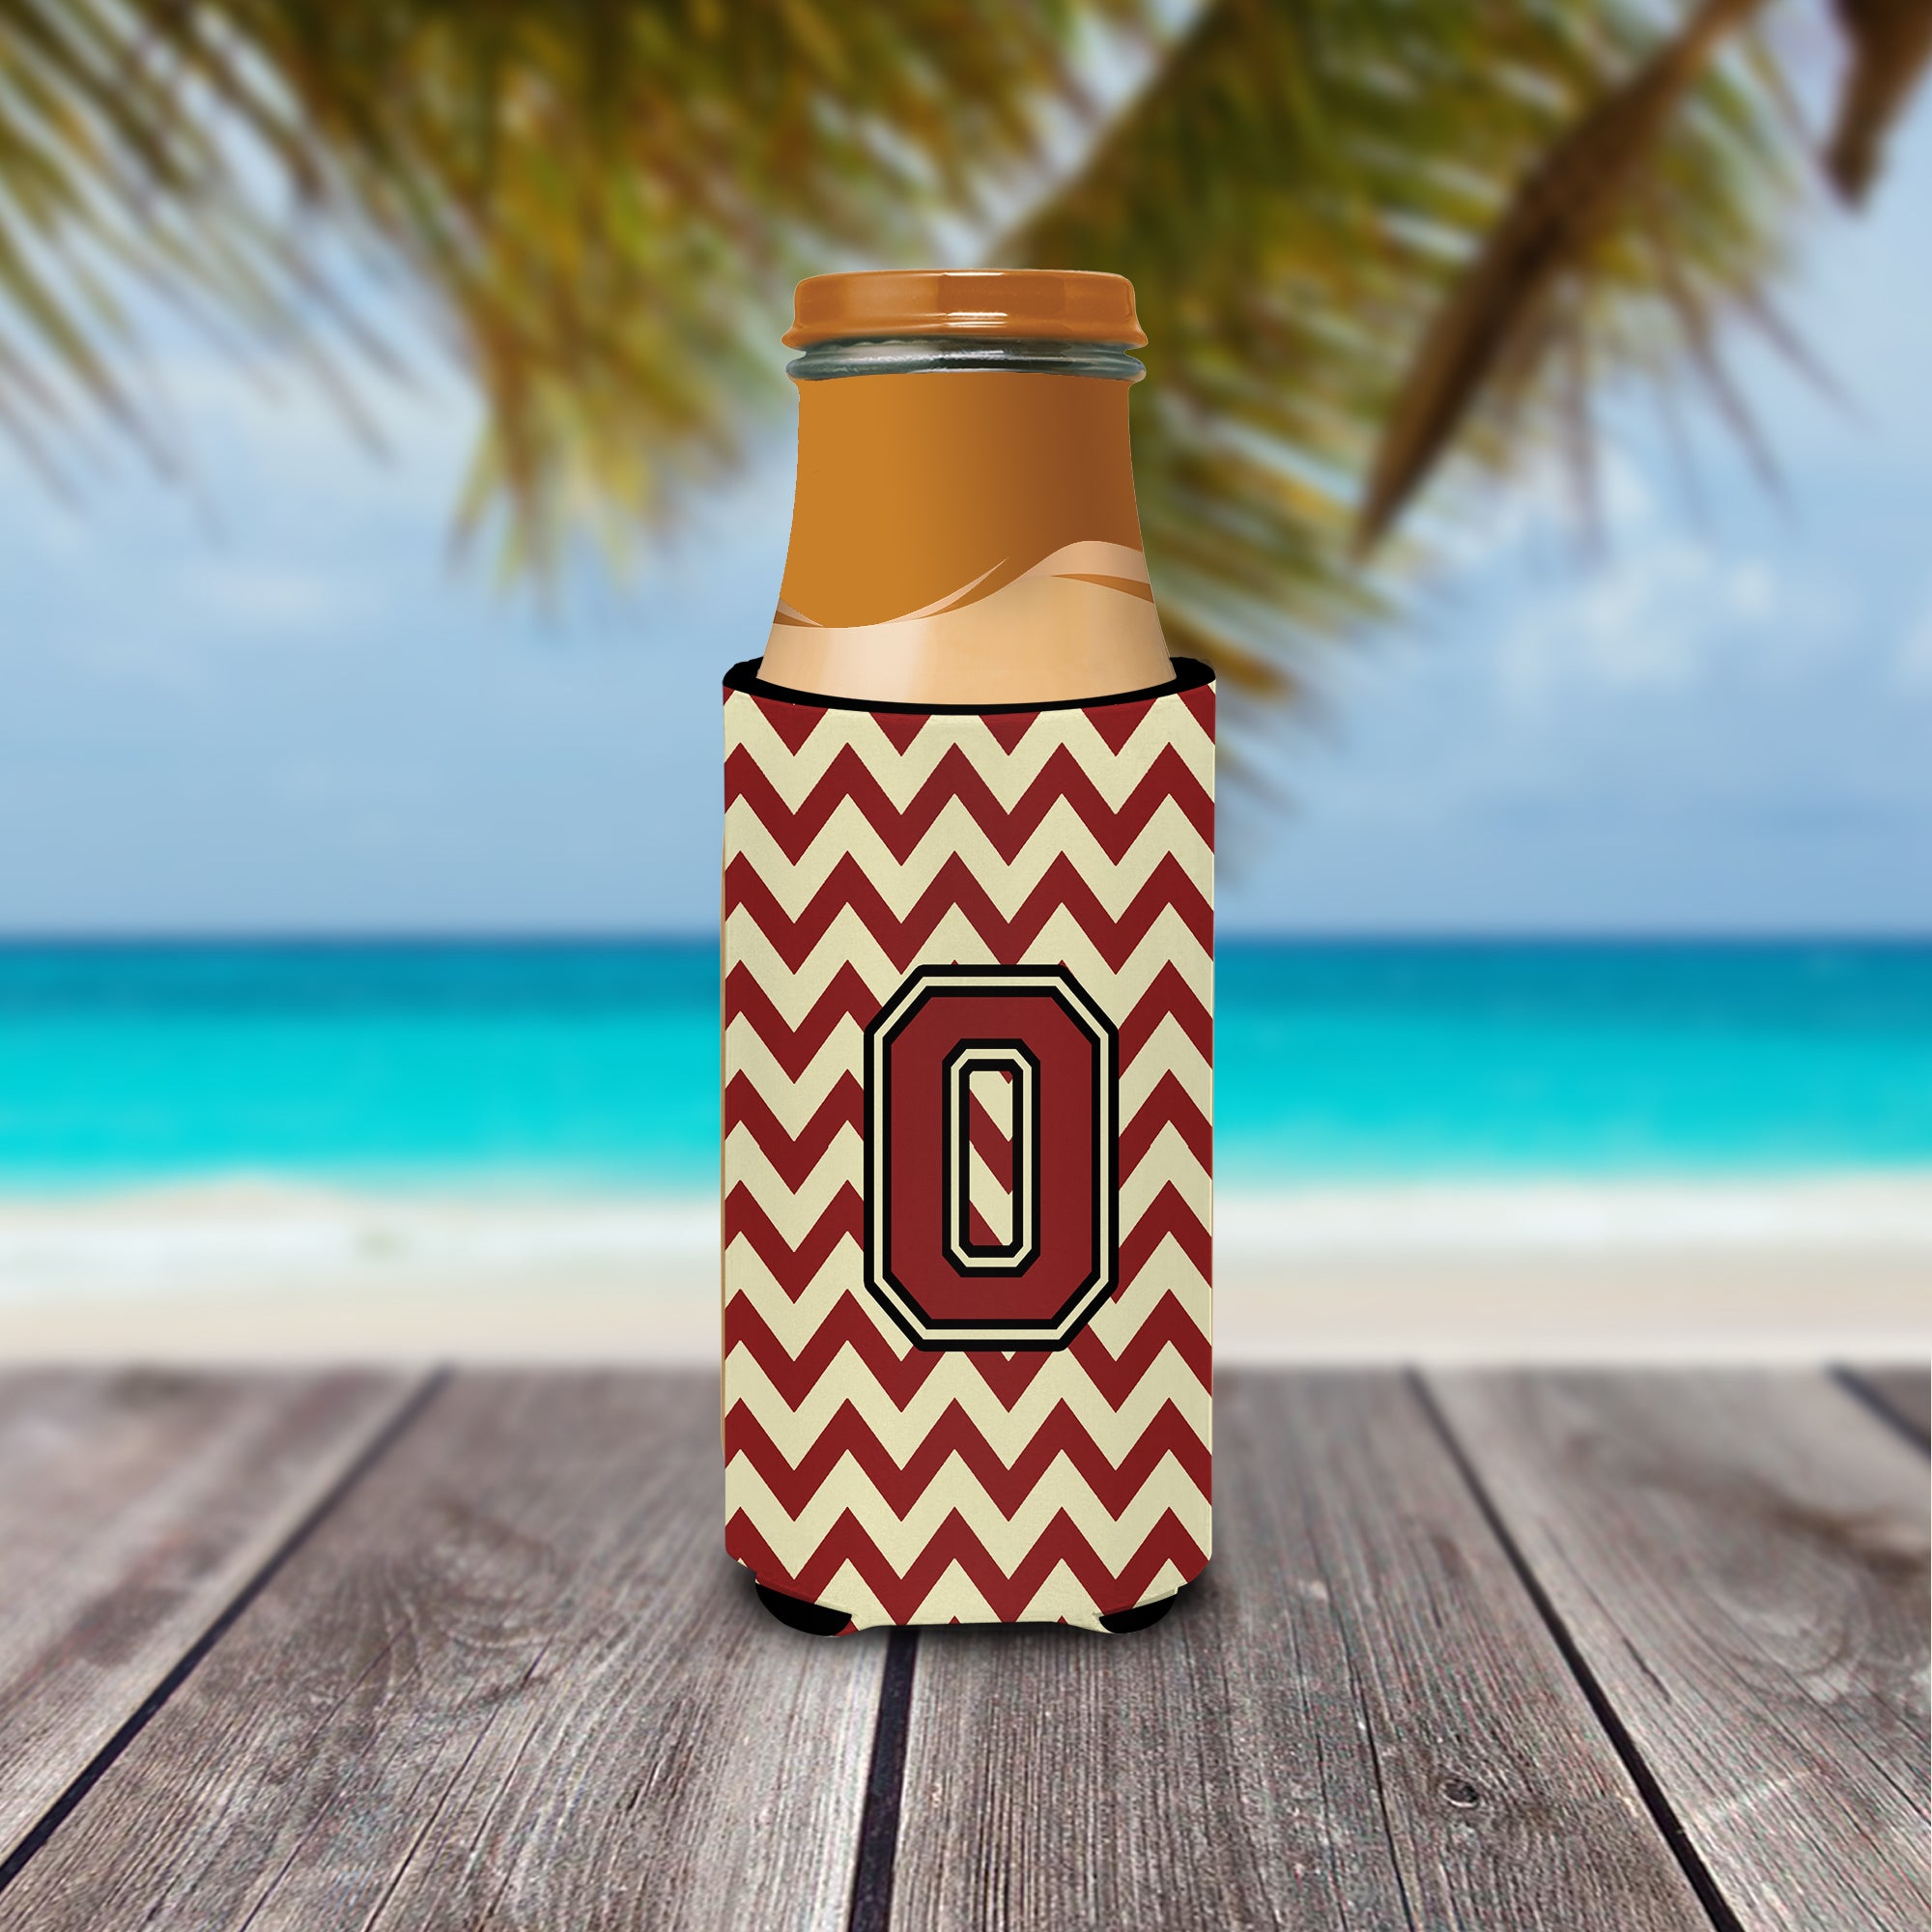 Letter O Chevron Maroon and Gold Ultra Beverage Insulators for slim cans CJ1061-OMUK.